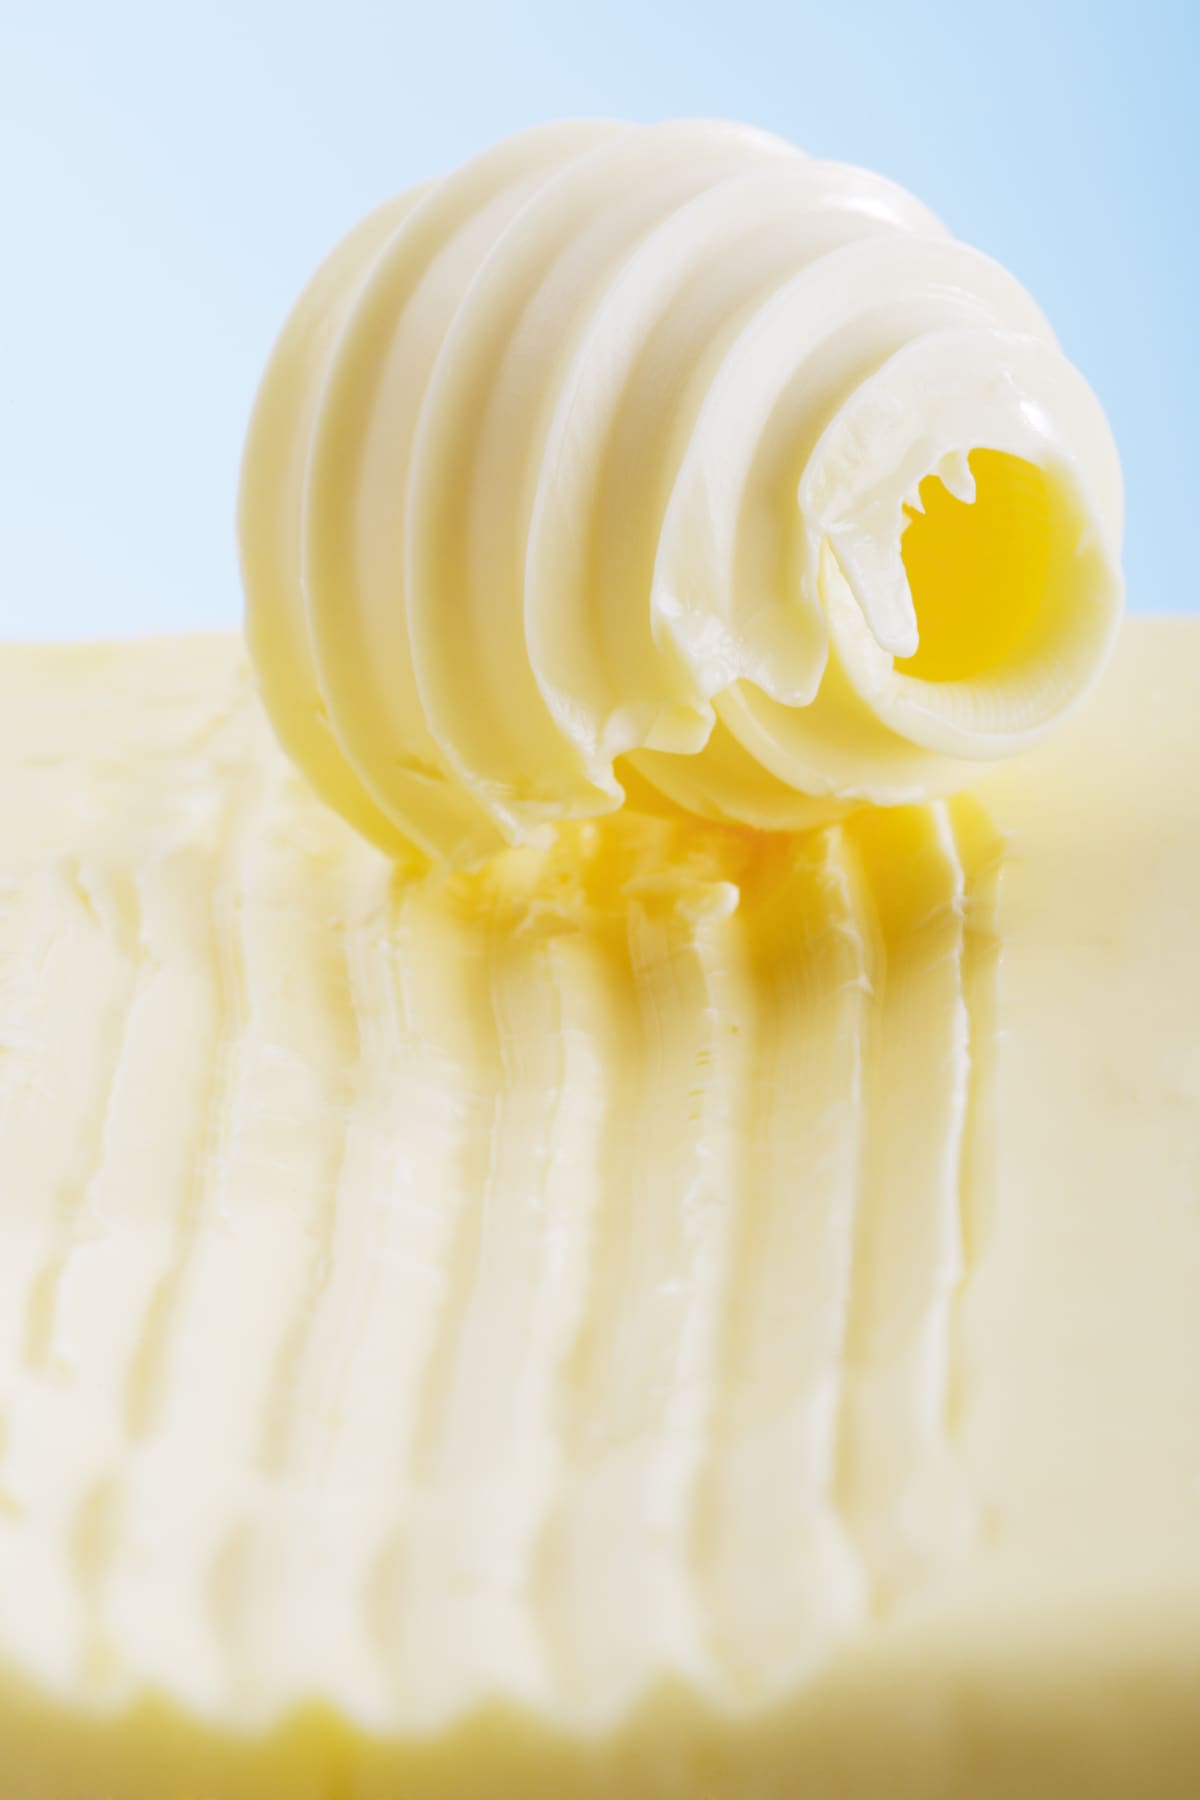 Stick of organic butter melting on white surface with shadow.